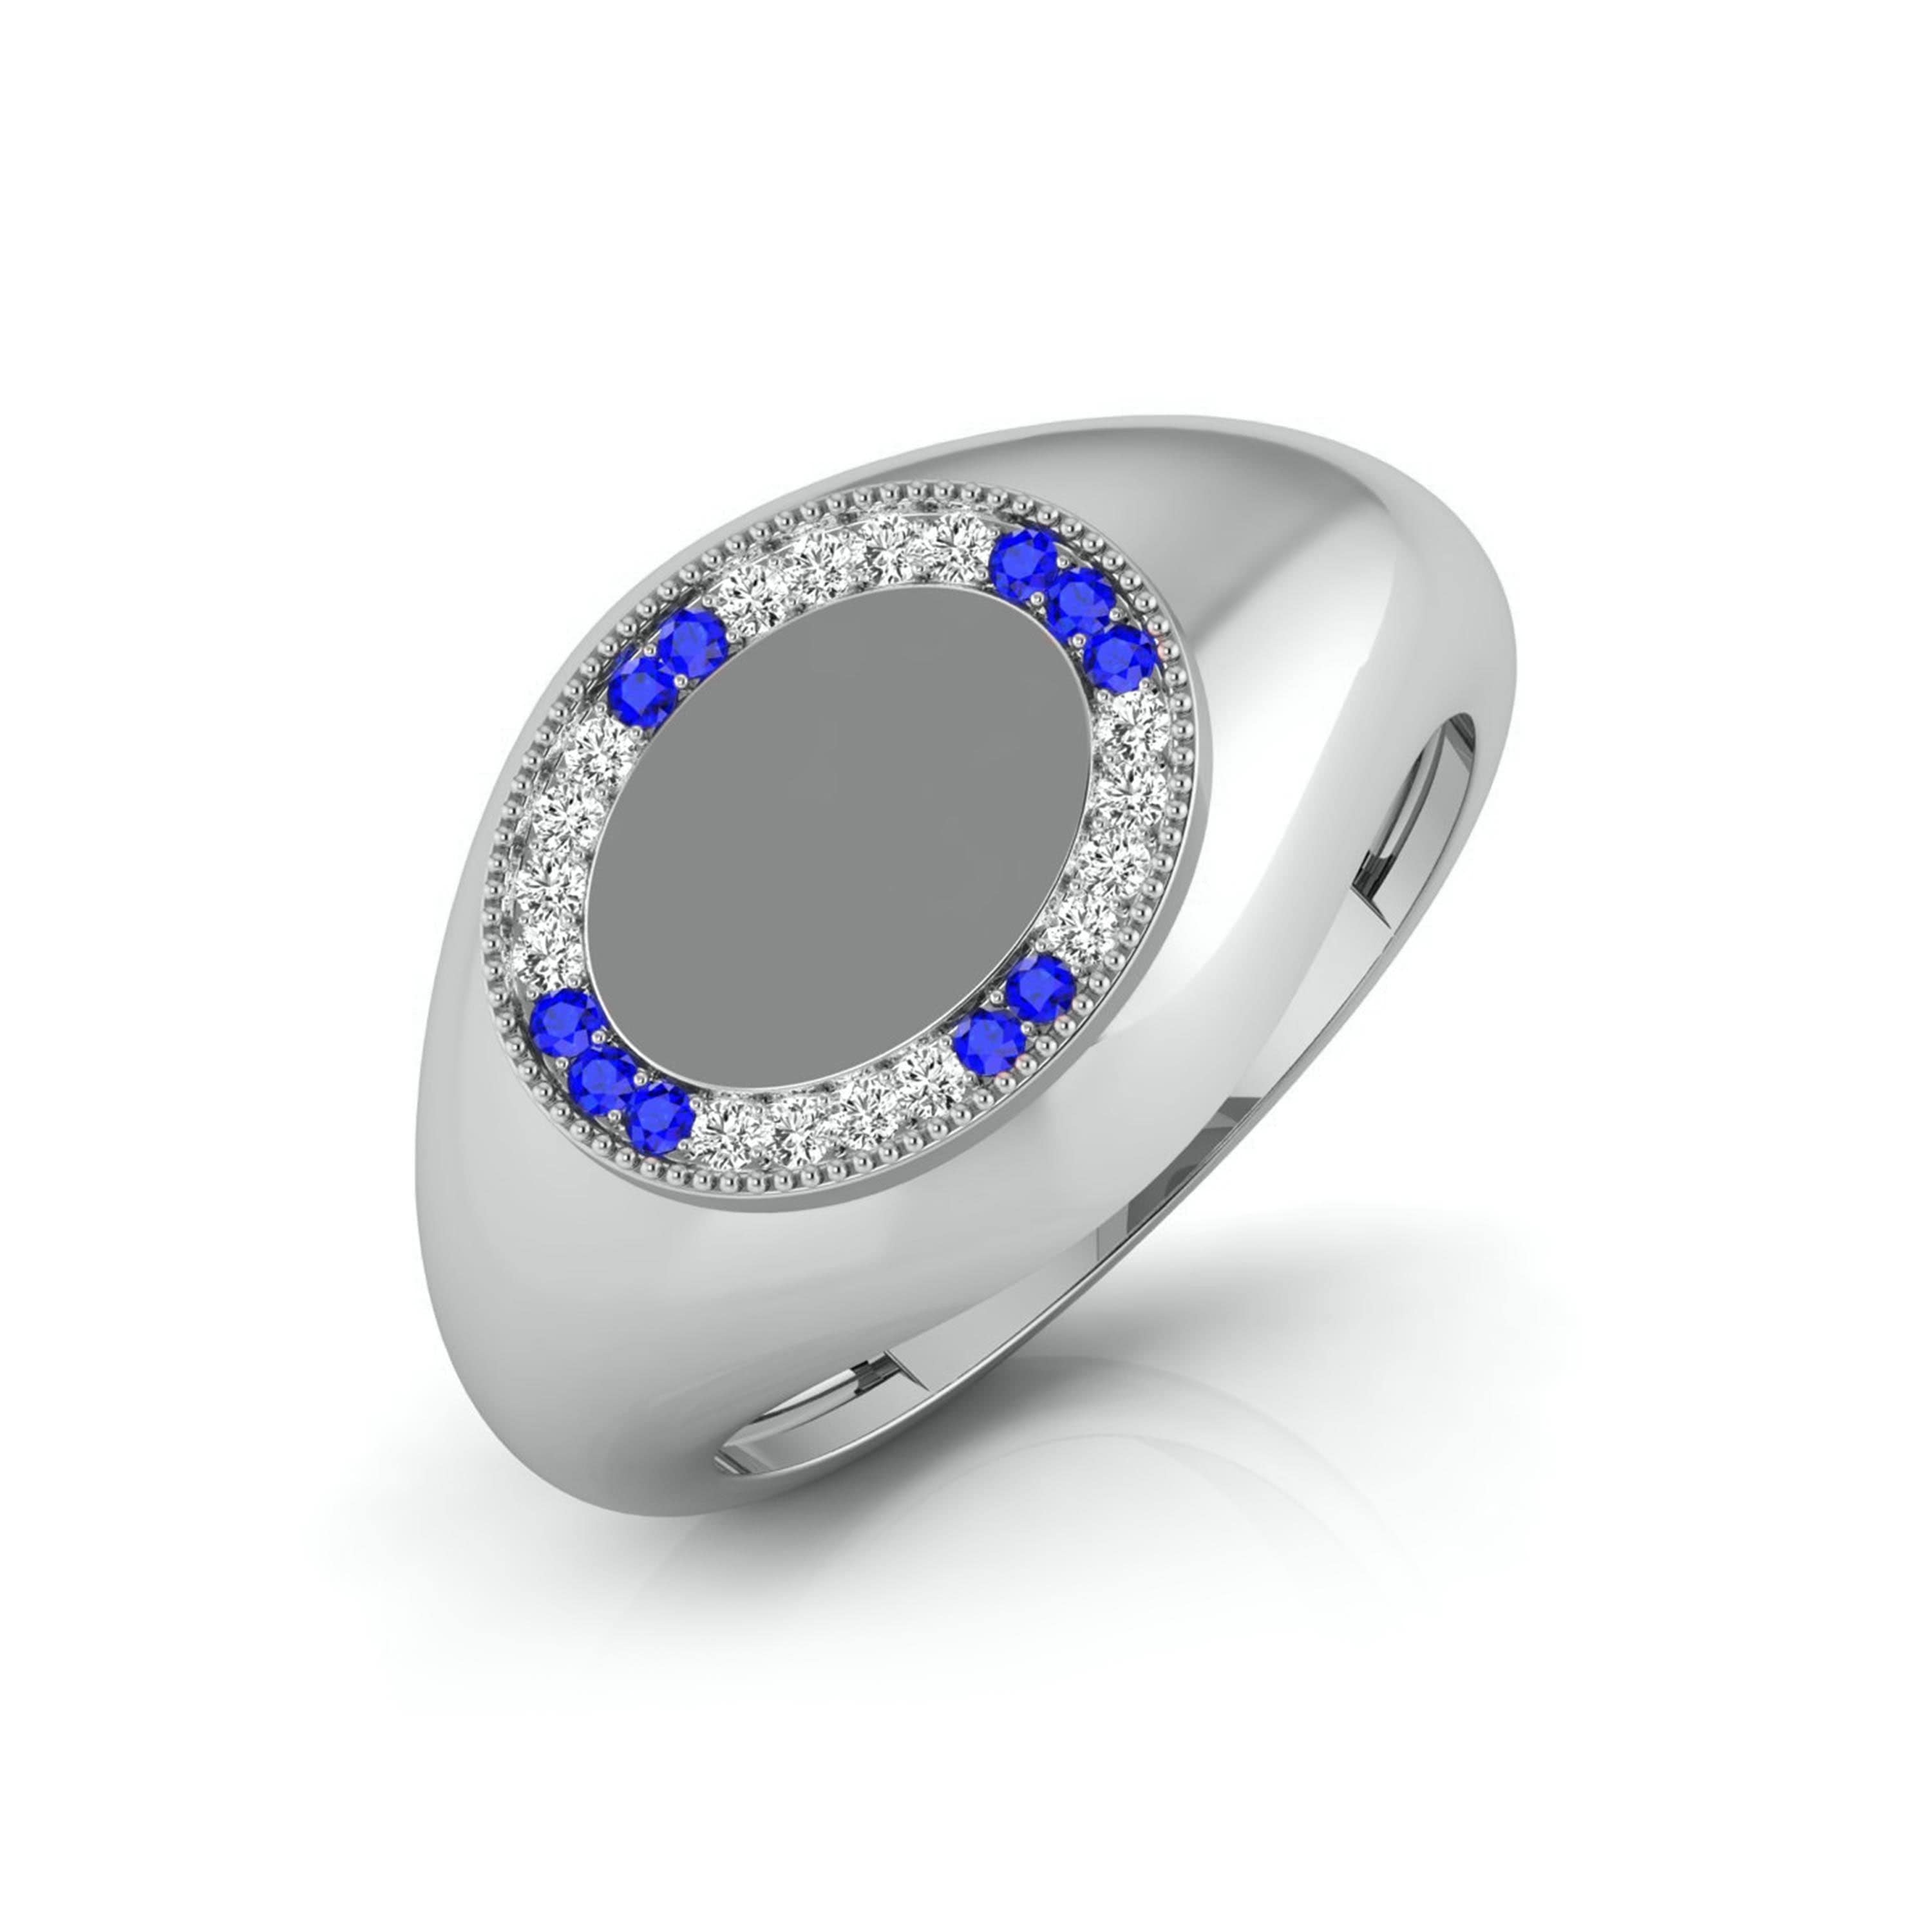 Buy Ornate Jewels 92.5 Sterling Silver Ring for Women Online At Best Price  @ Tata CLiQ